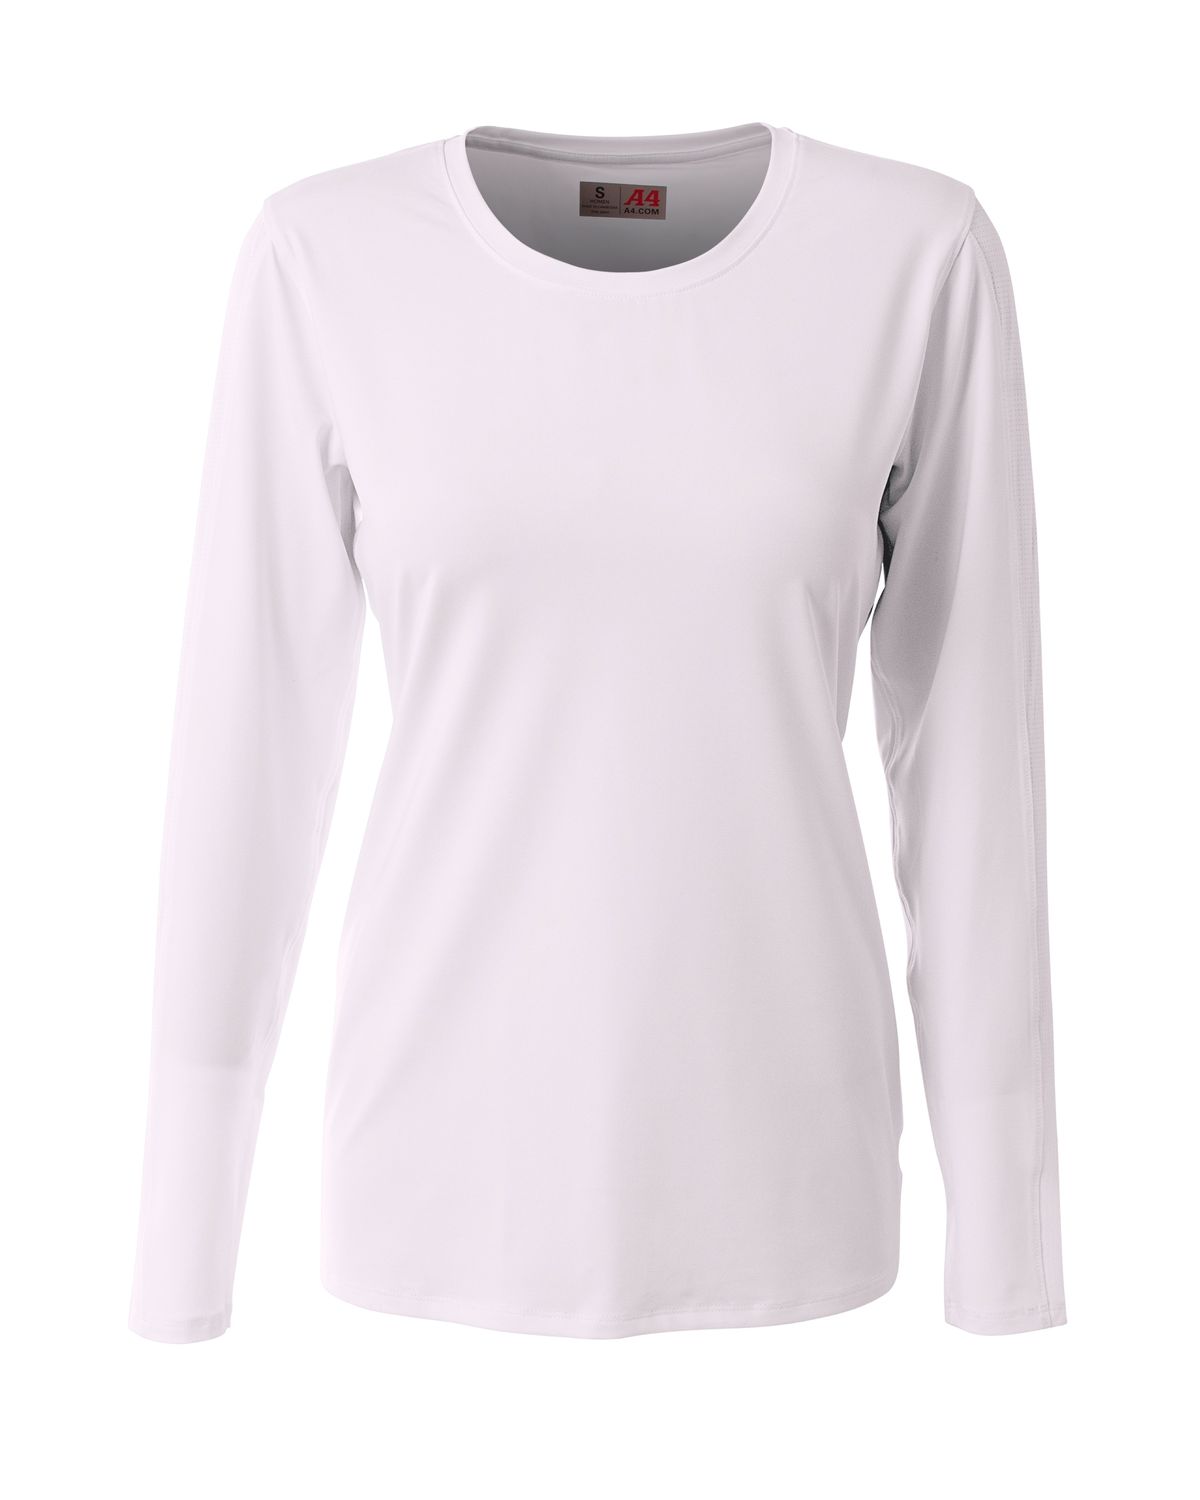 'A4 NG3015 Youth Spike Long Sleeve Volleyball Je'